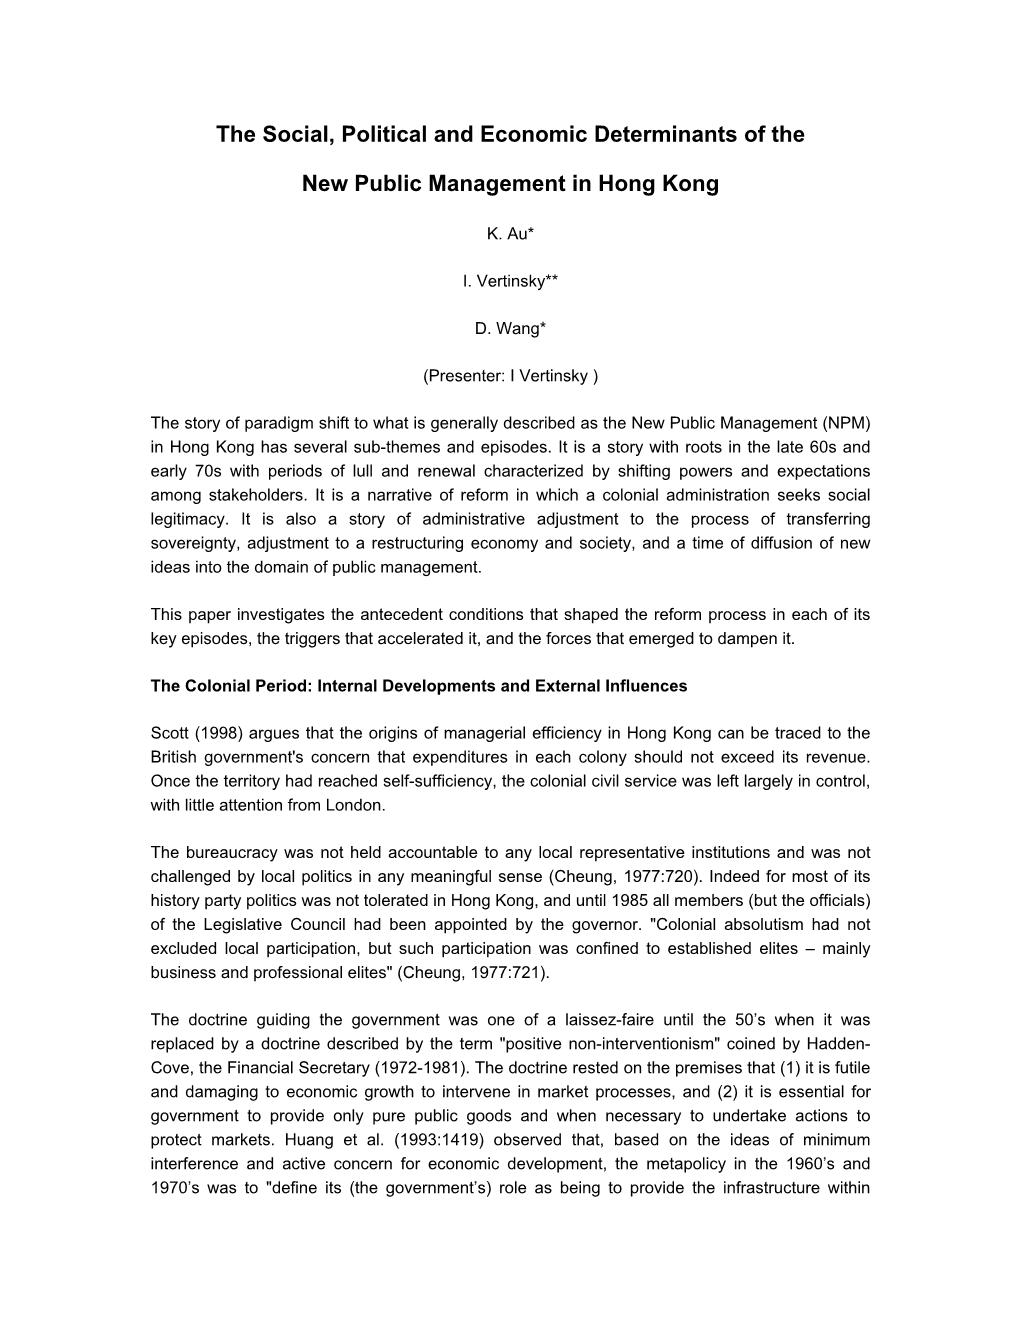 The Social, Political and Economic Determinants of the New Public